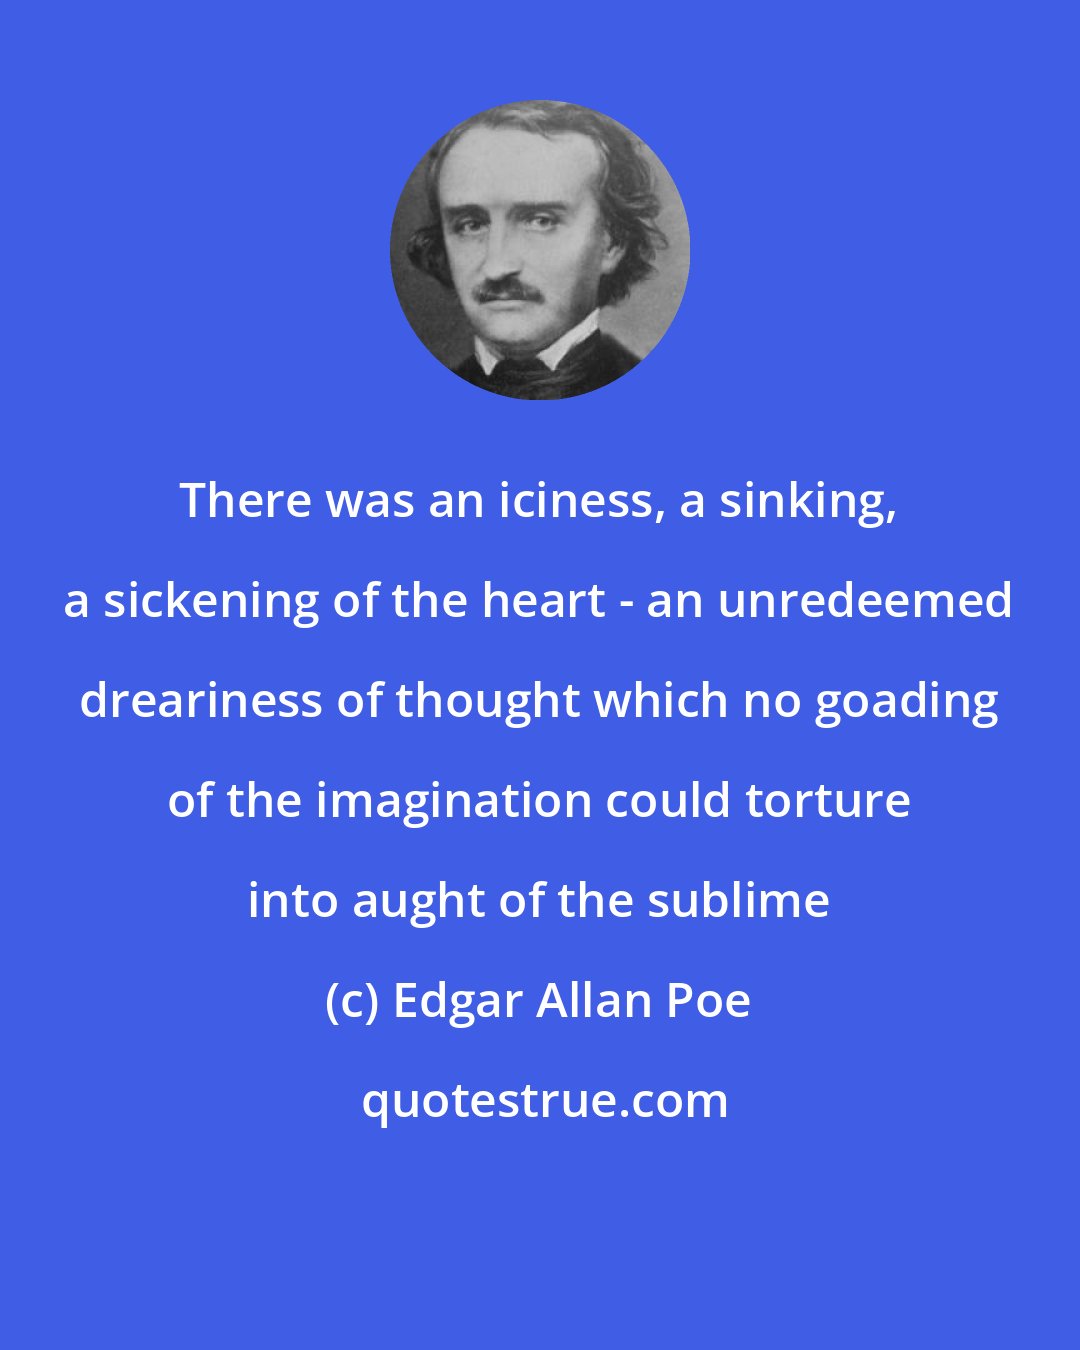 Edgar Allan Poe: There was an iciness, a sinking, a sickening of the heart - an unredeemed dreariness of thought which no goading of the imagination could torture into aught of the sublime